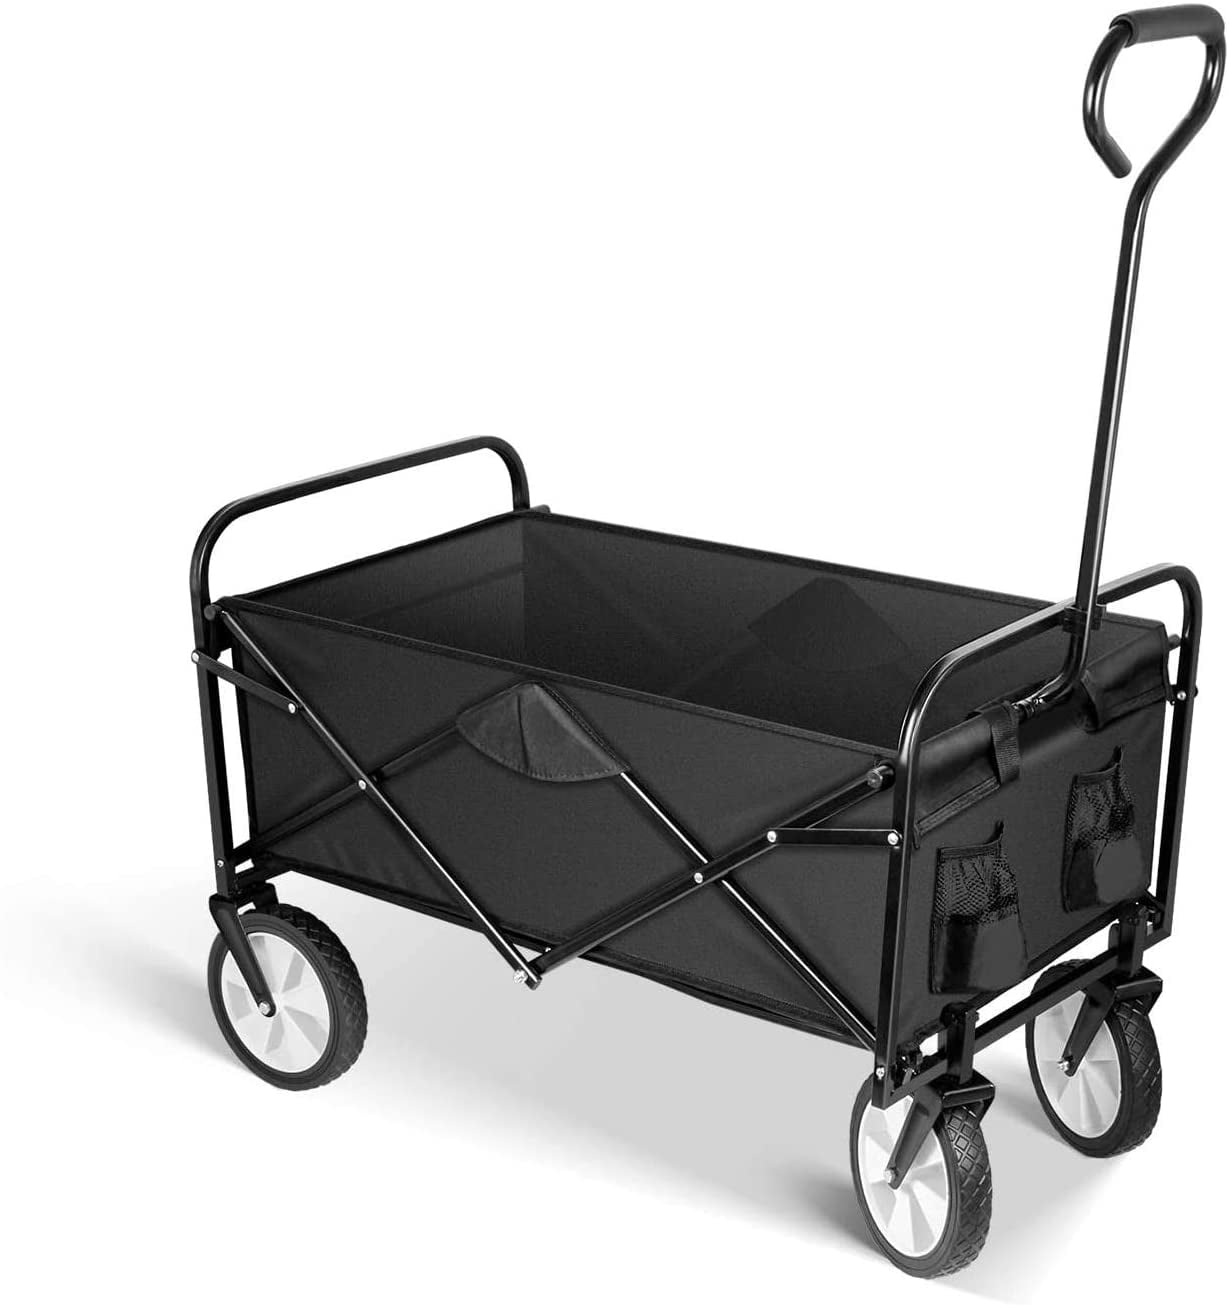 YSSOA Rolling Collapsible Garden Cart Camping Wagon, with 360